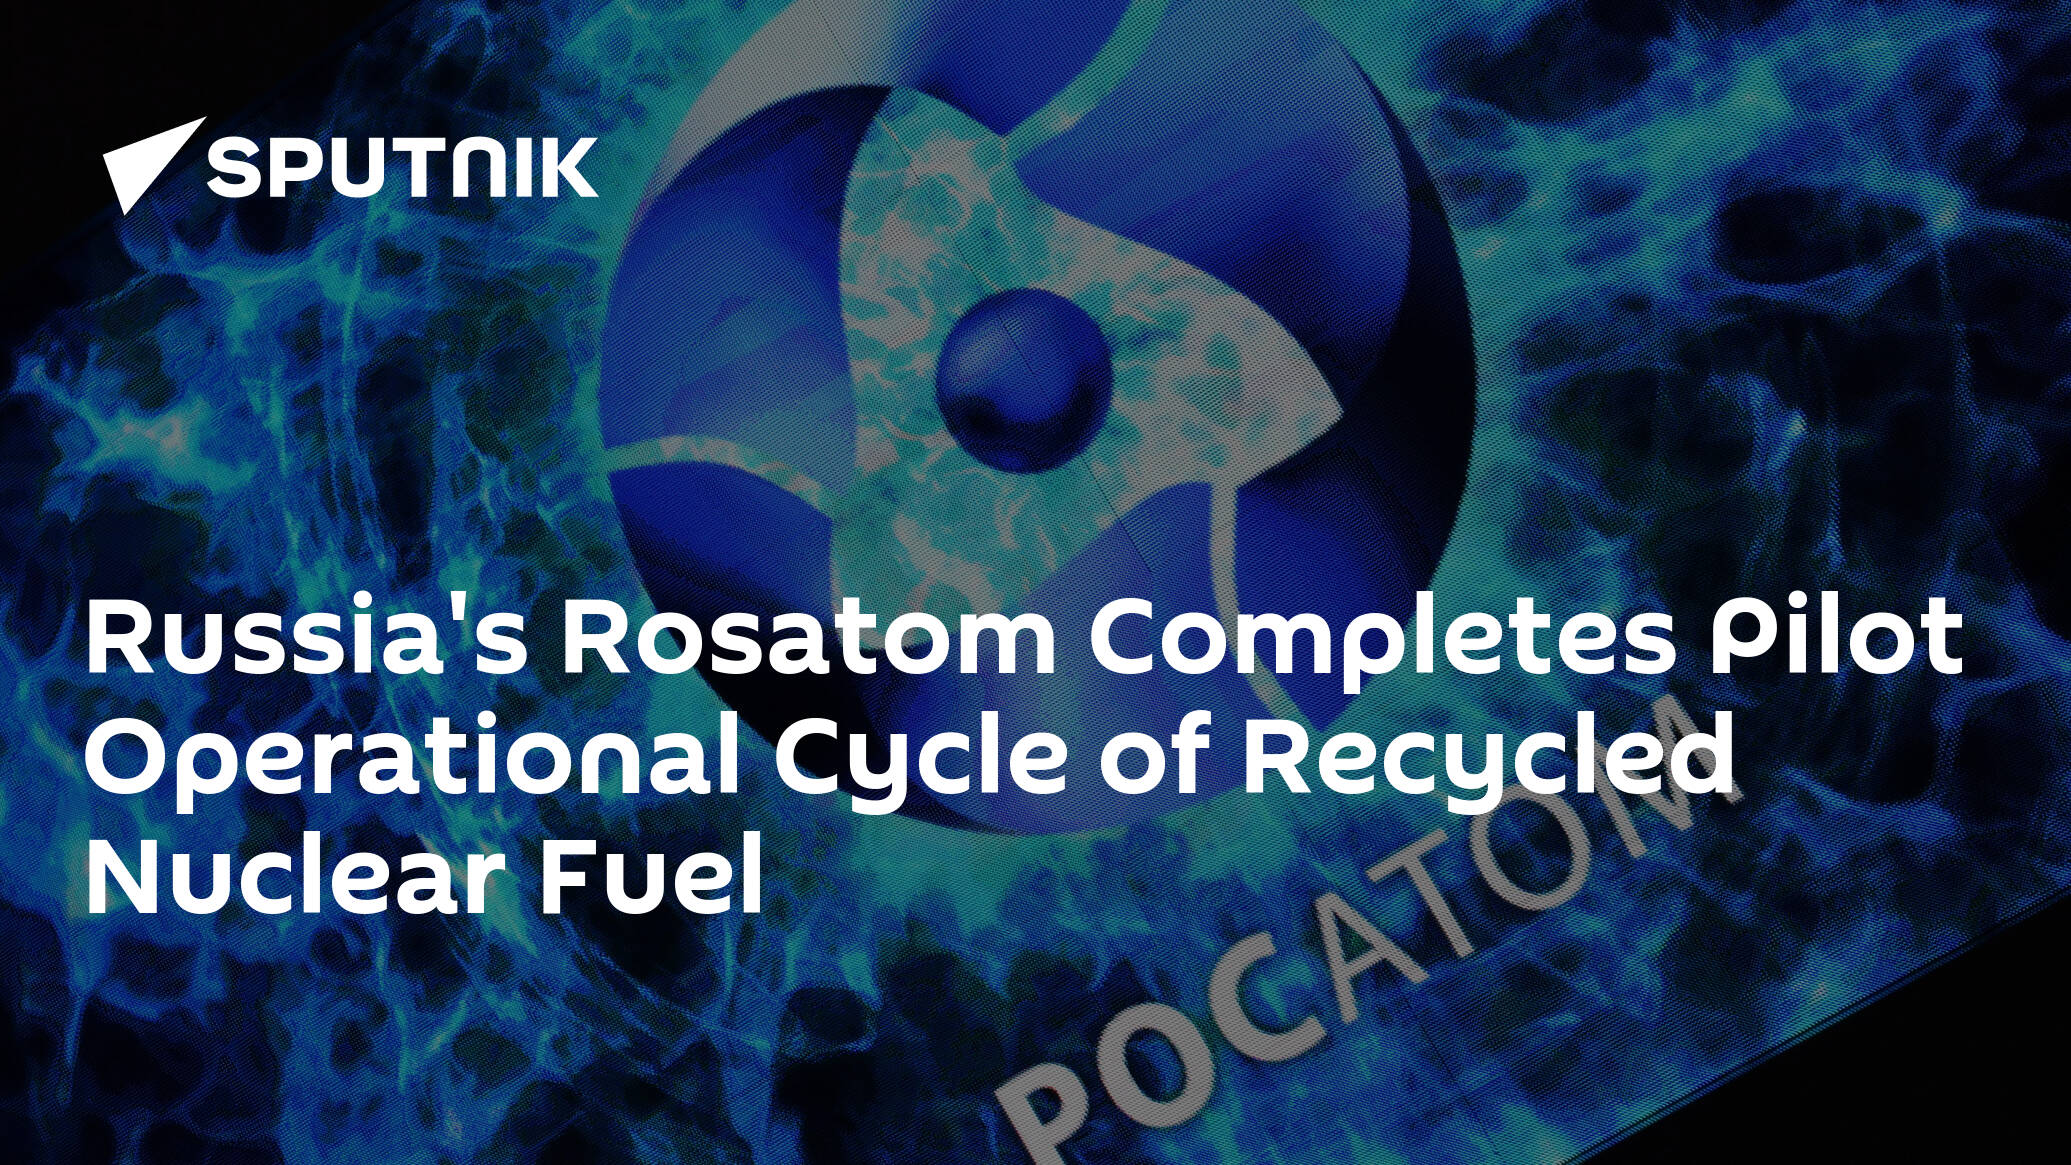 Russia's Rosatom Completes Pilot Operational Cycle of Recycled Nuclear Fuel